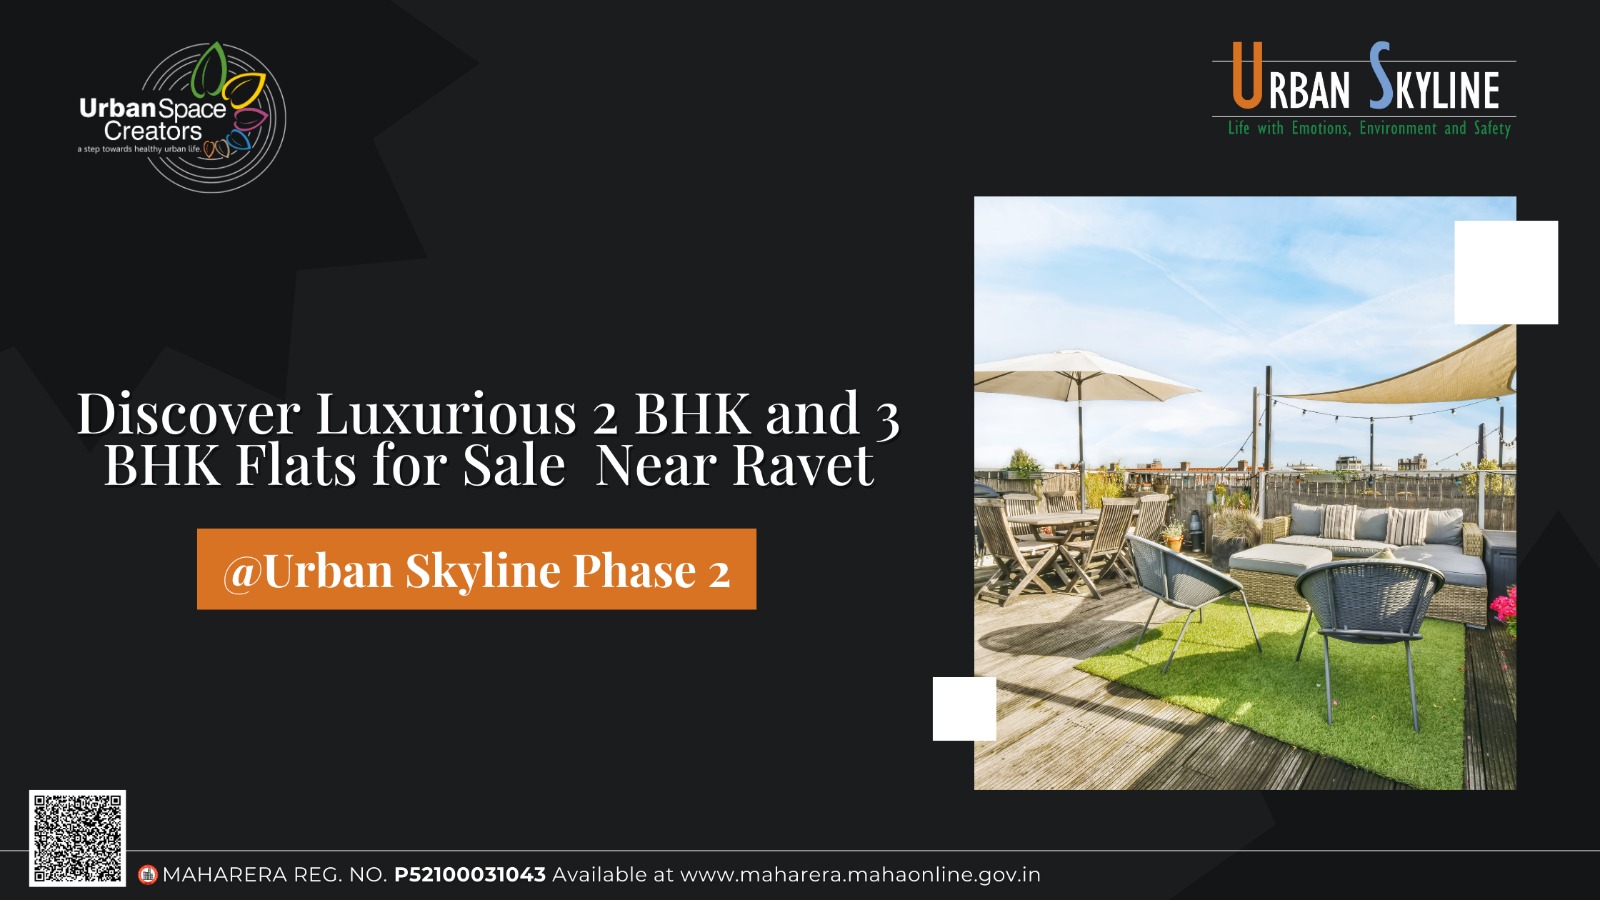 Discover Luxurious 2 BHK and 3 BHK Flats for Sale Near Ravet at Urban Skyline Phase 2